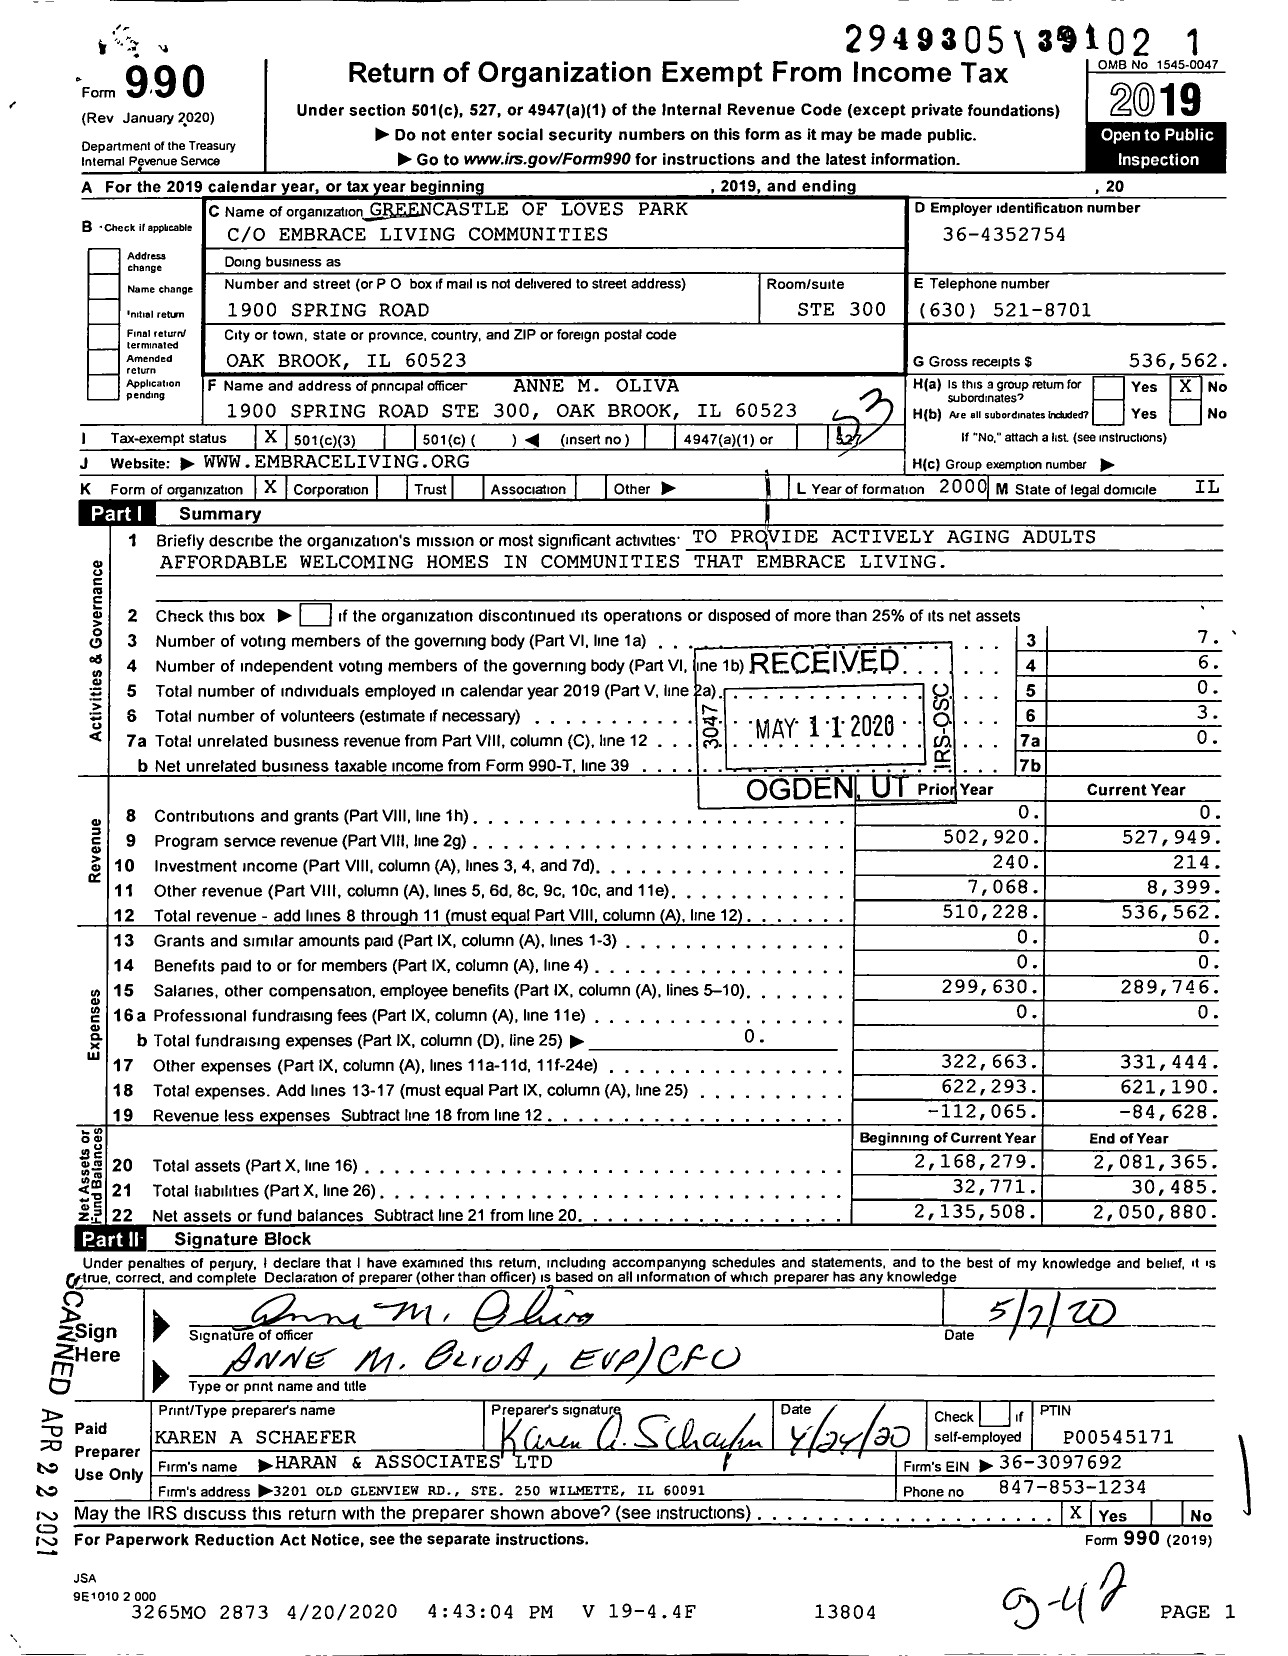 Image of first page of 2019 Form 990 for Greencastle of Loves Park